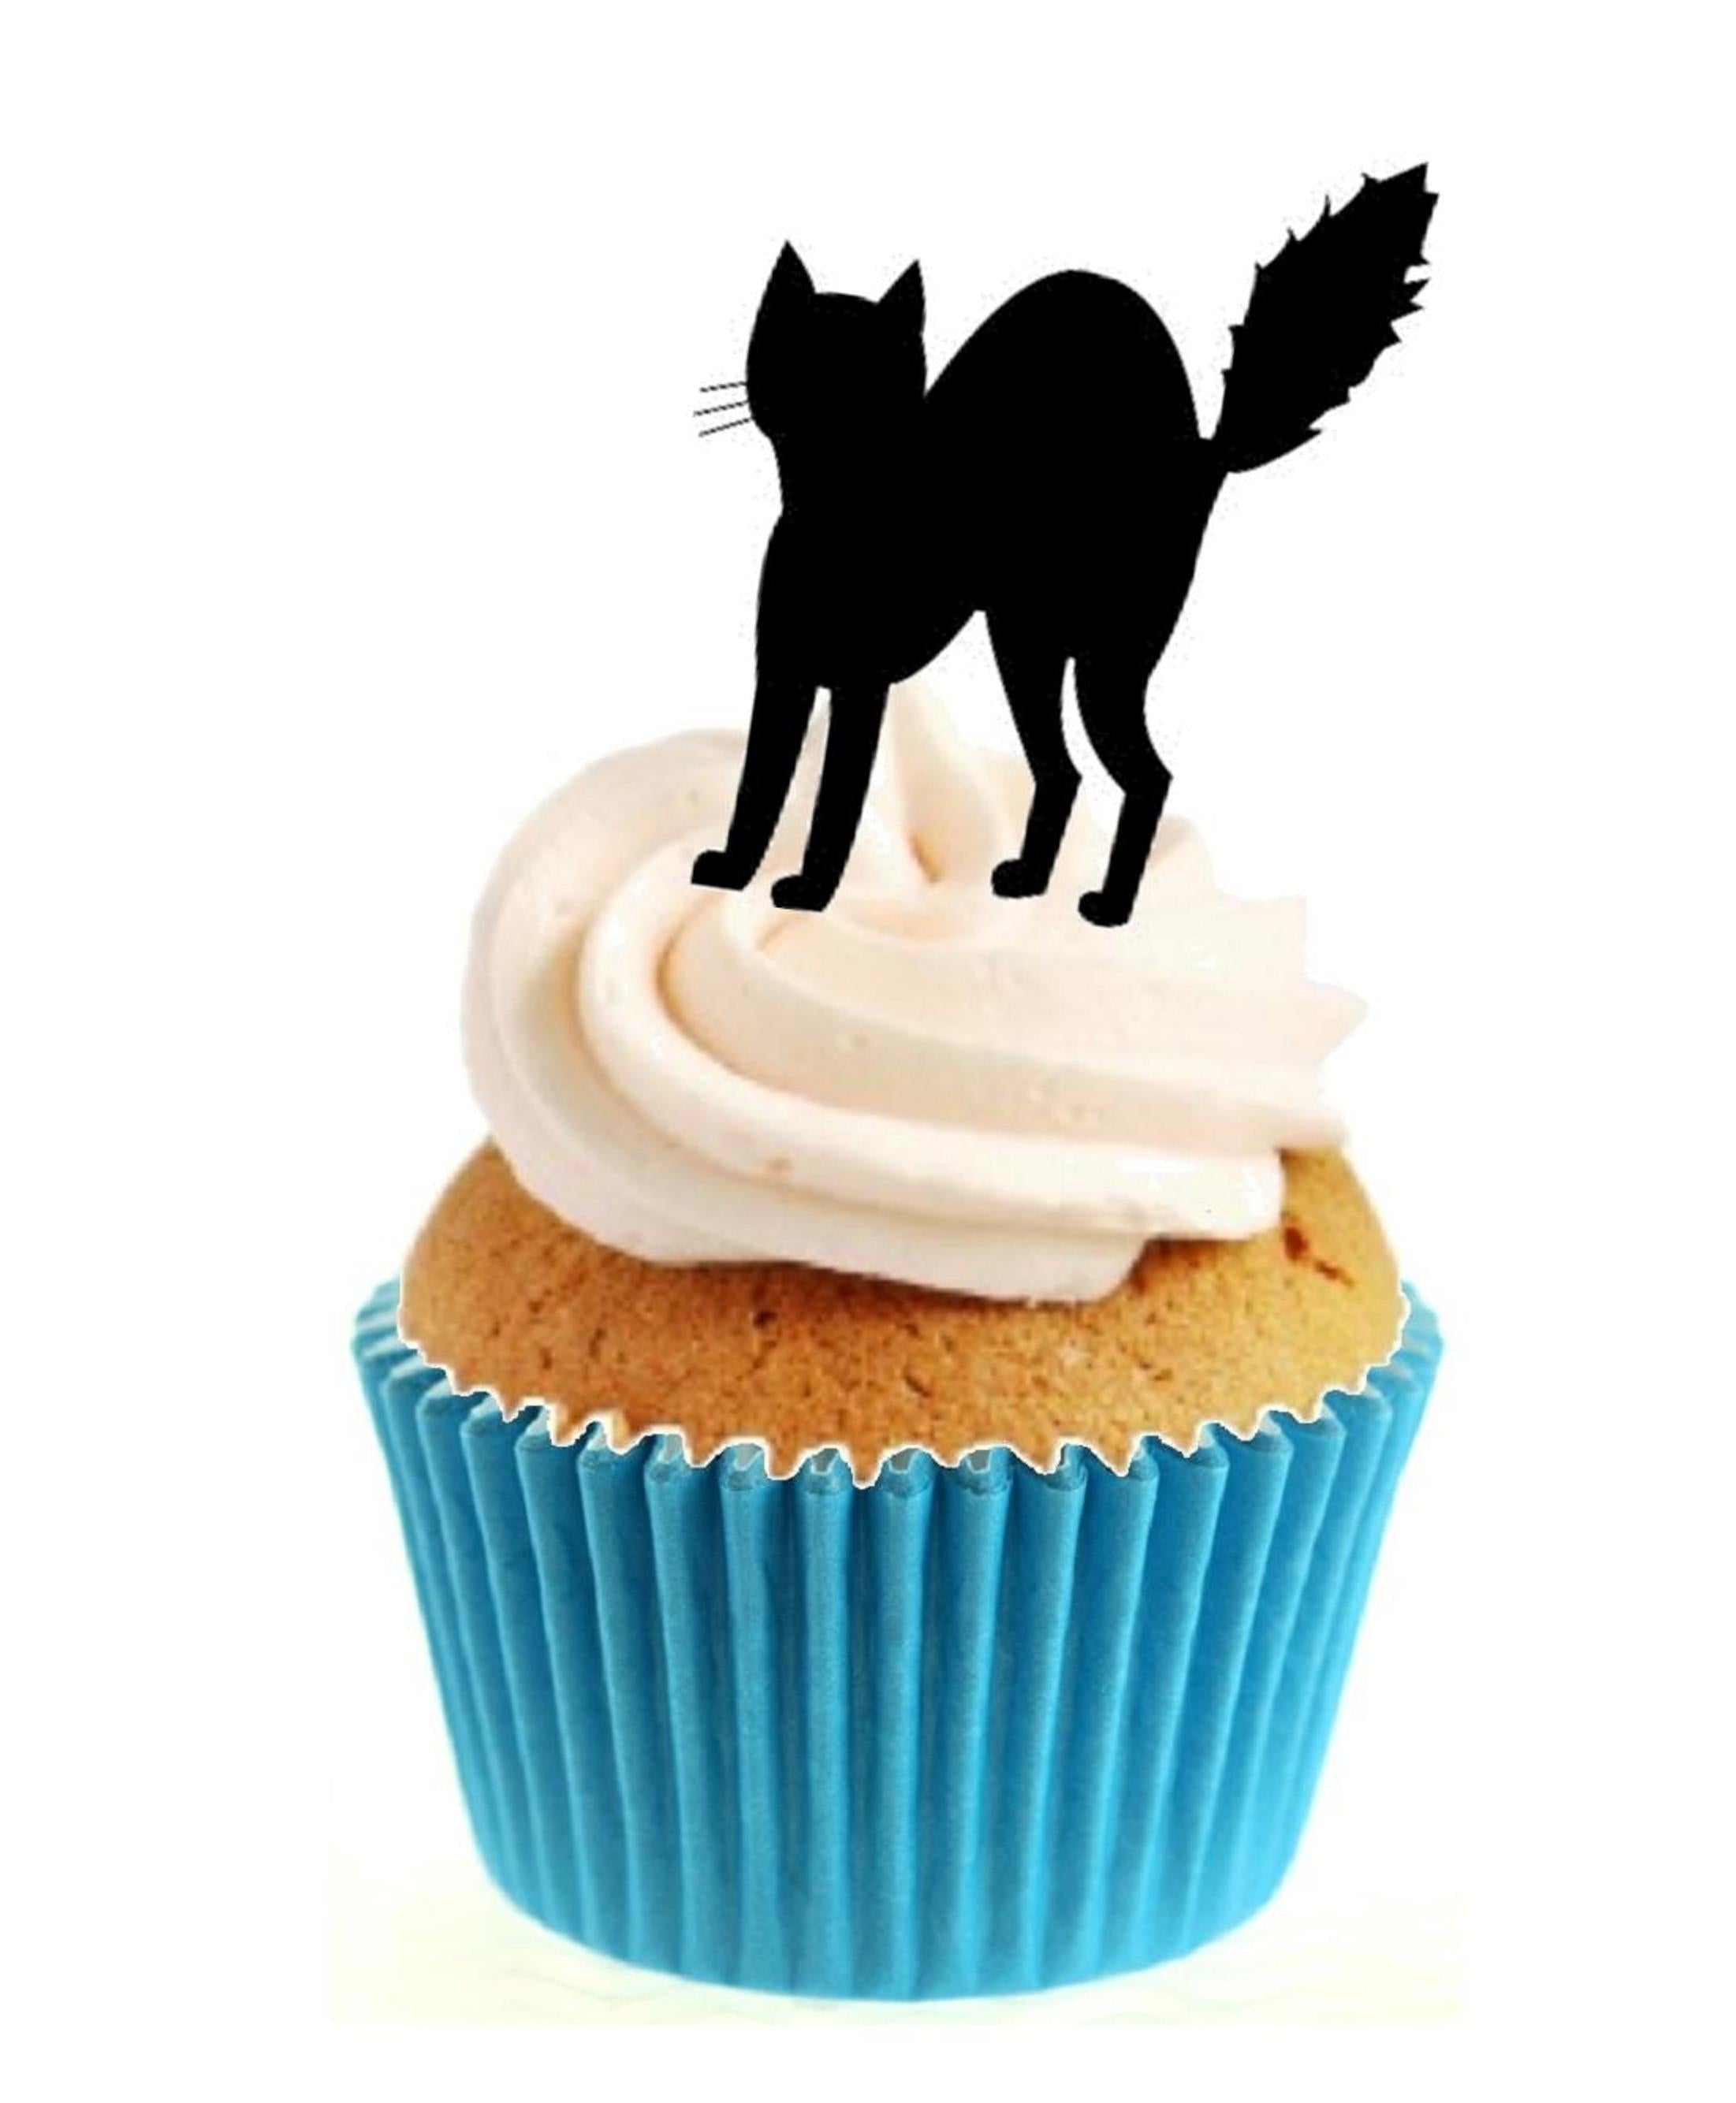 Amazon.com: 25 pcs Cat Birthday Party Cake Decoration, 24pcs Cat Cupcake  Toppers with 1 pcs Cat Birthday Cake Topper for Cat Themed Girls Kids Baby  Shower Party : Pet Supplies